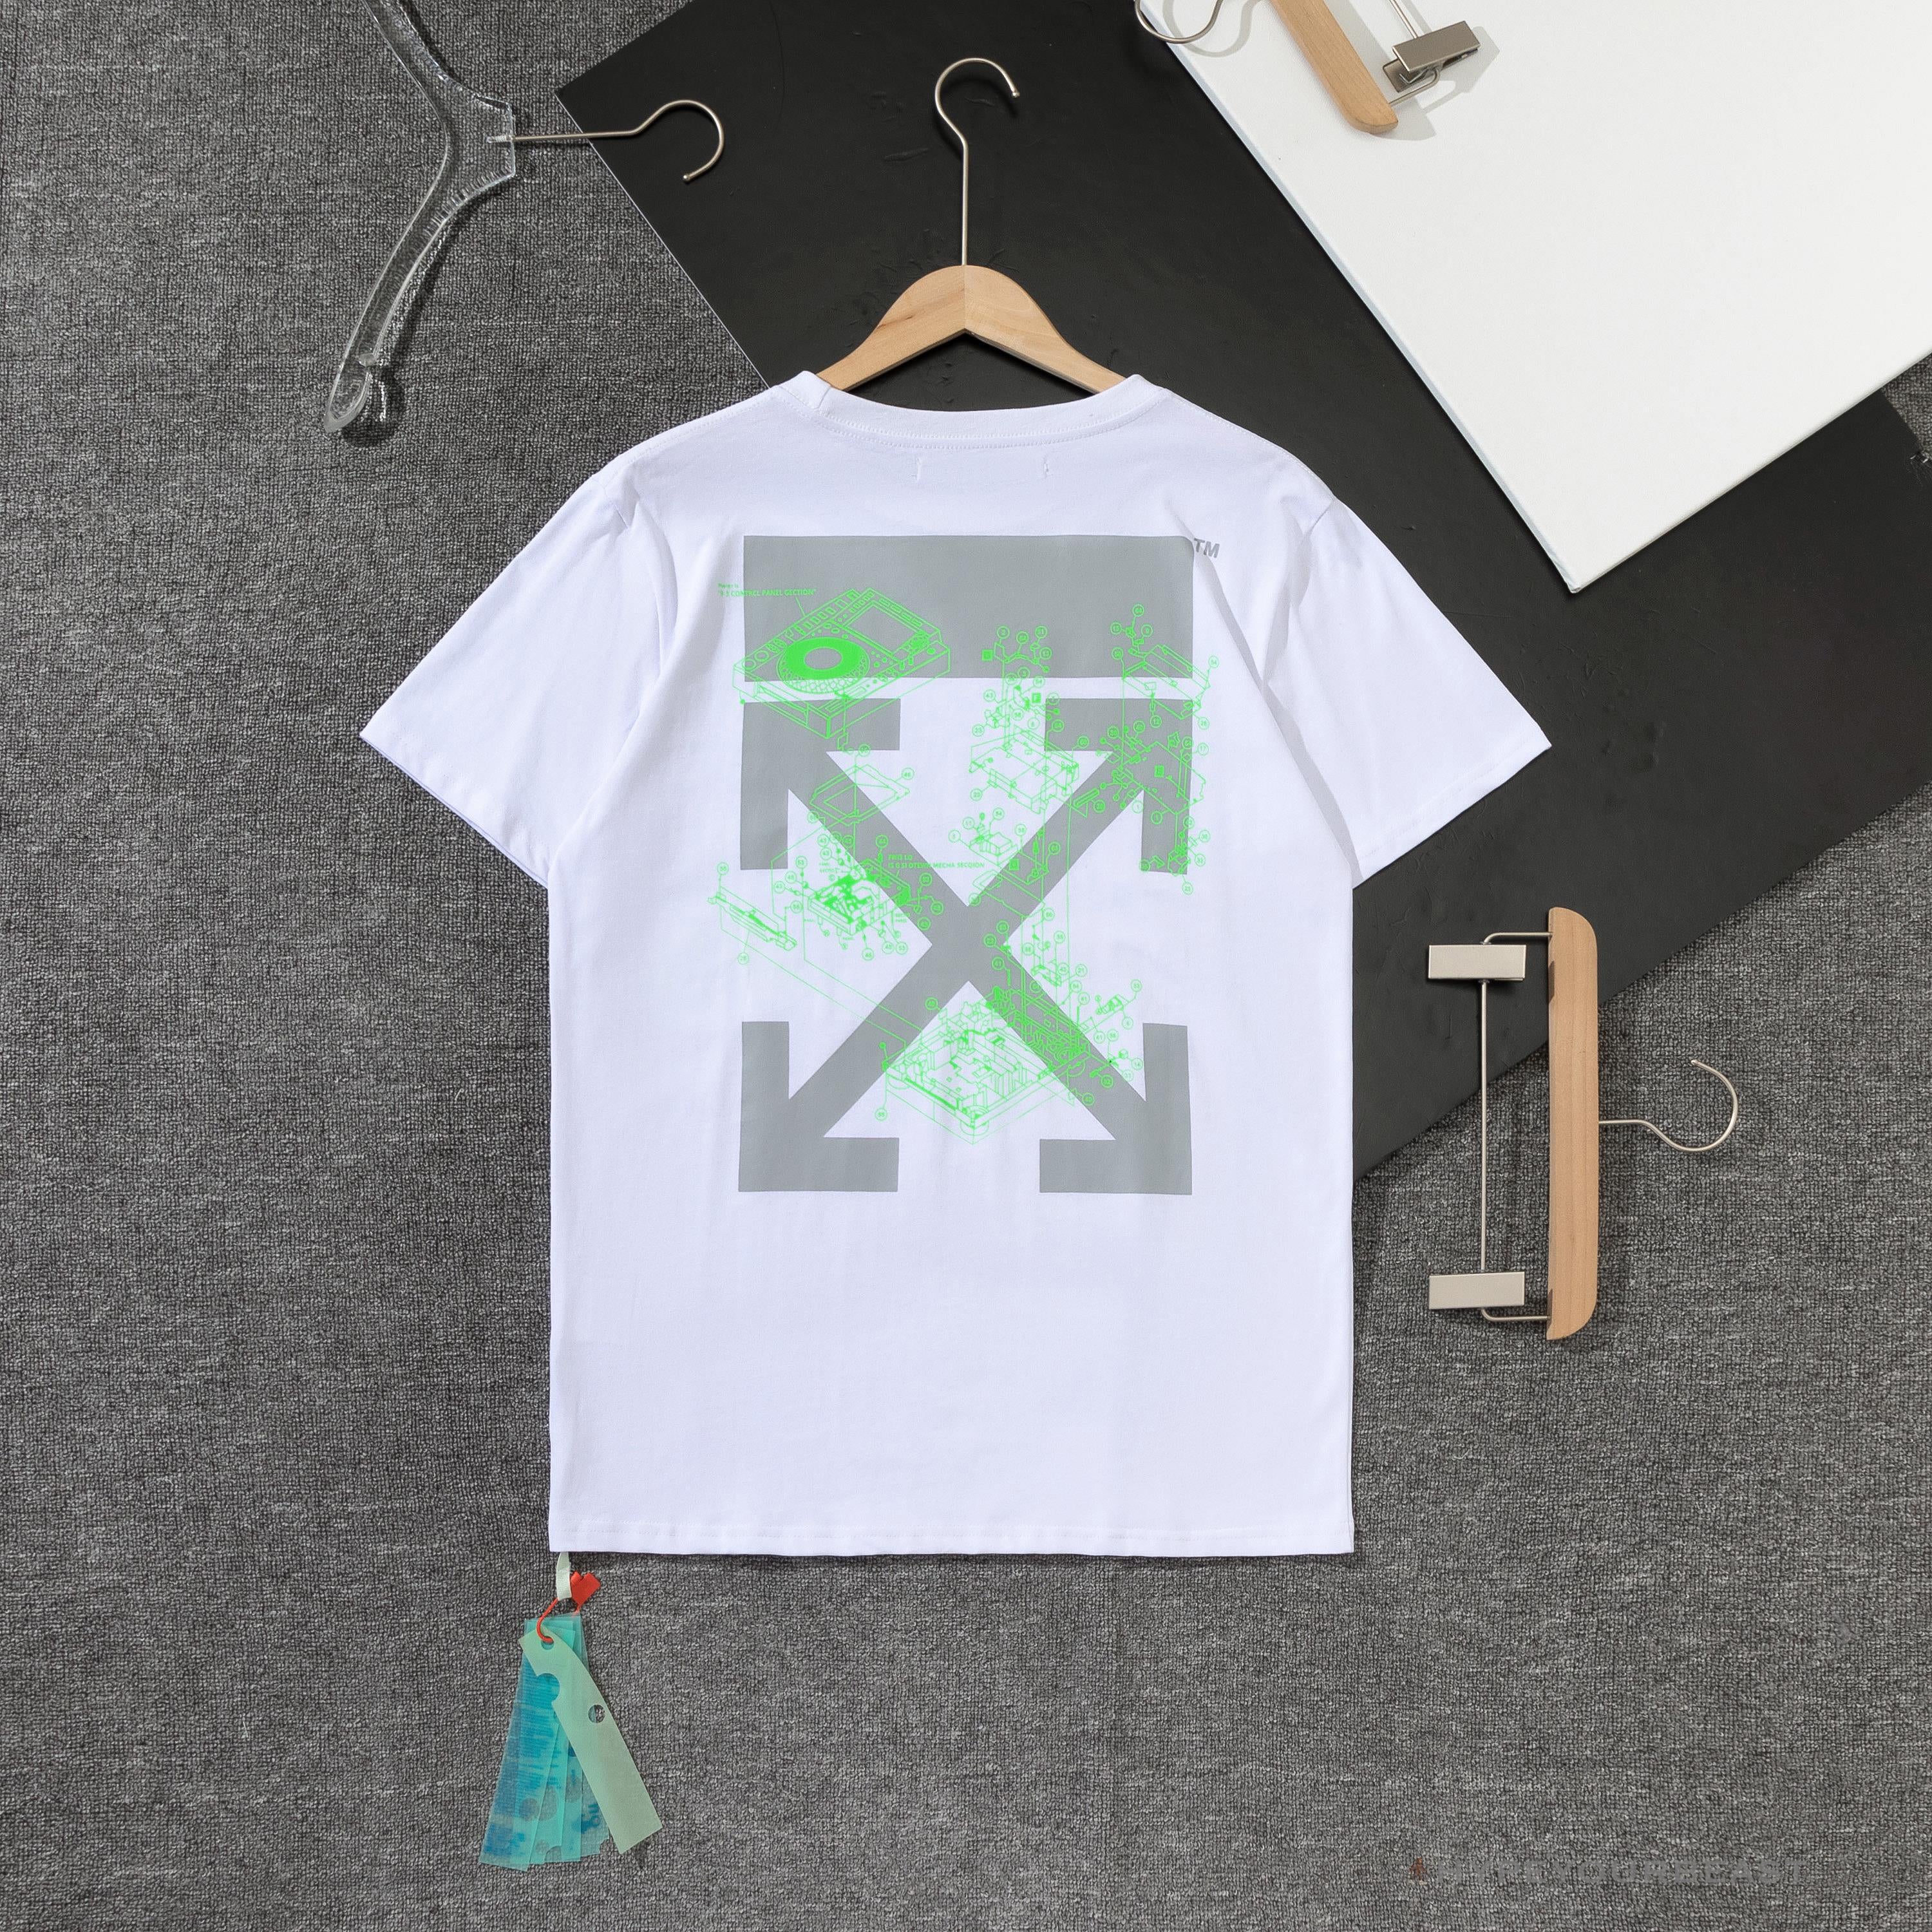 OFF-WHITE Mechanical Style 'WHITE' Tee Shirt